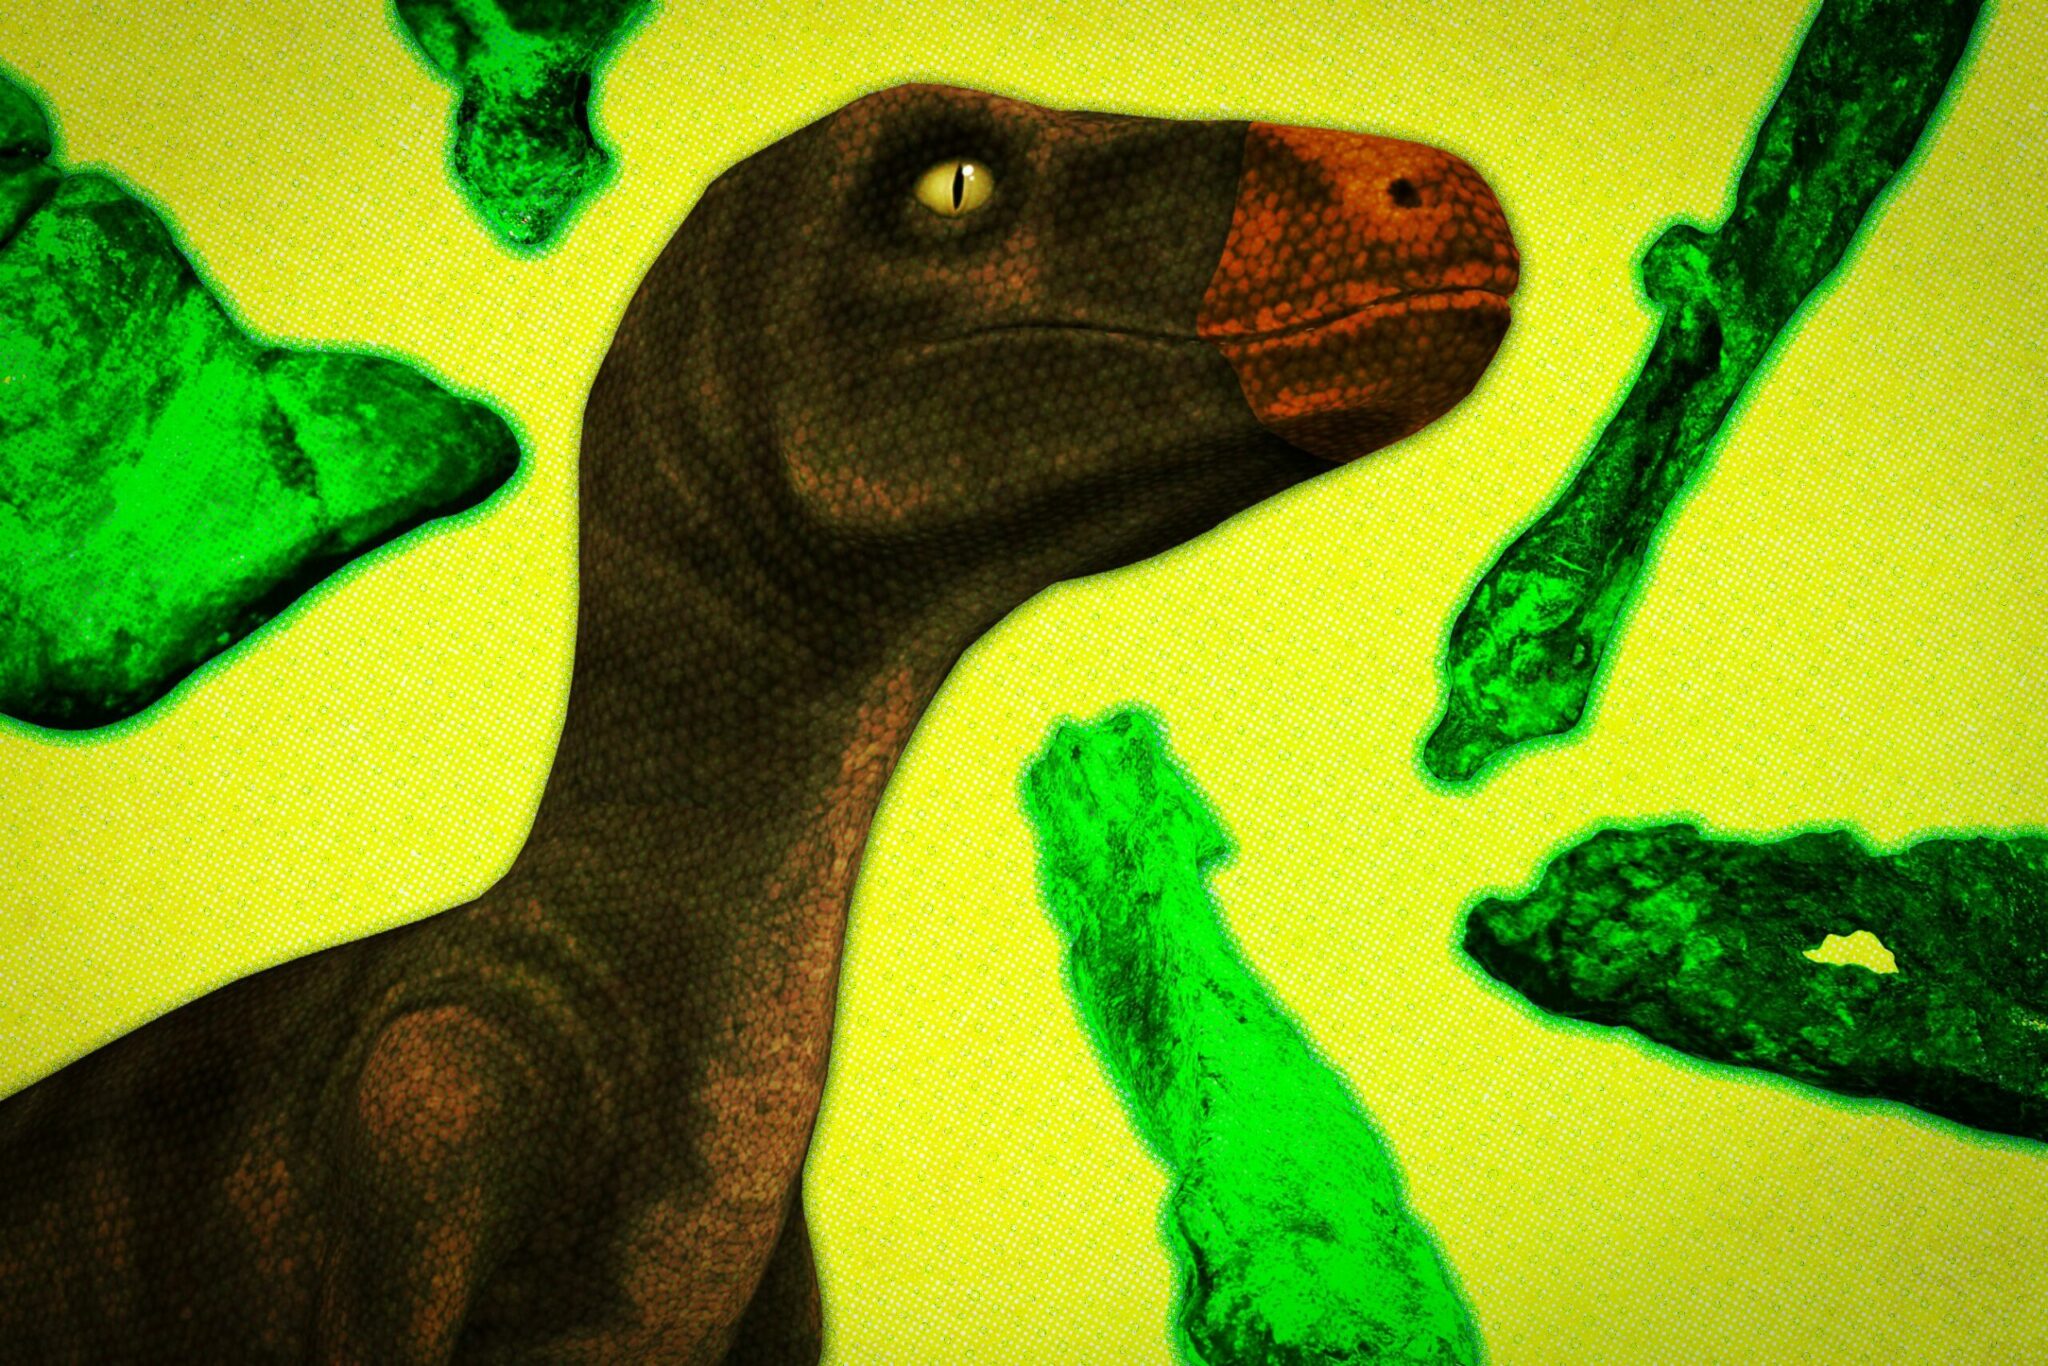 who discovered the first dinosaur fossil proving that giant dinosaurs once walked the earth and when scaled